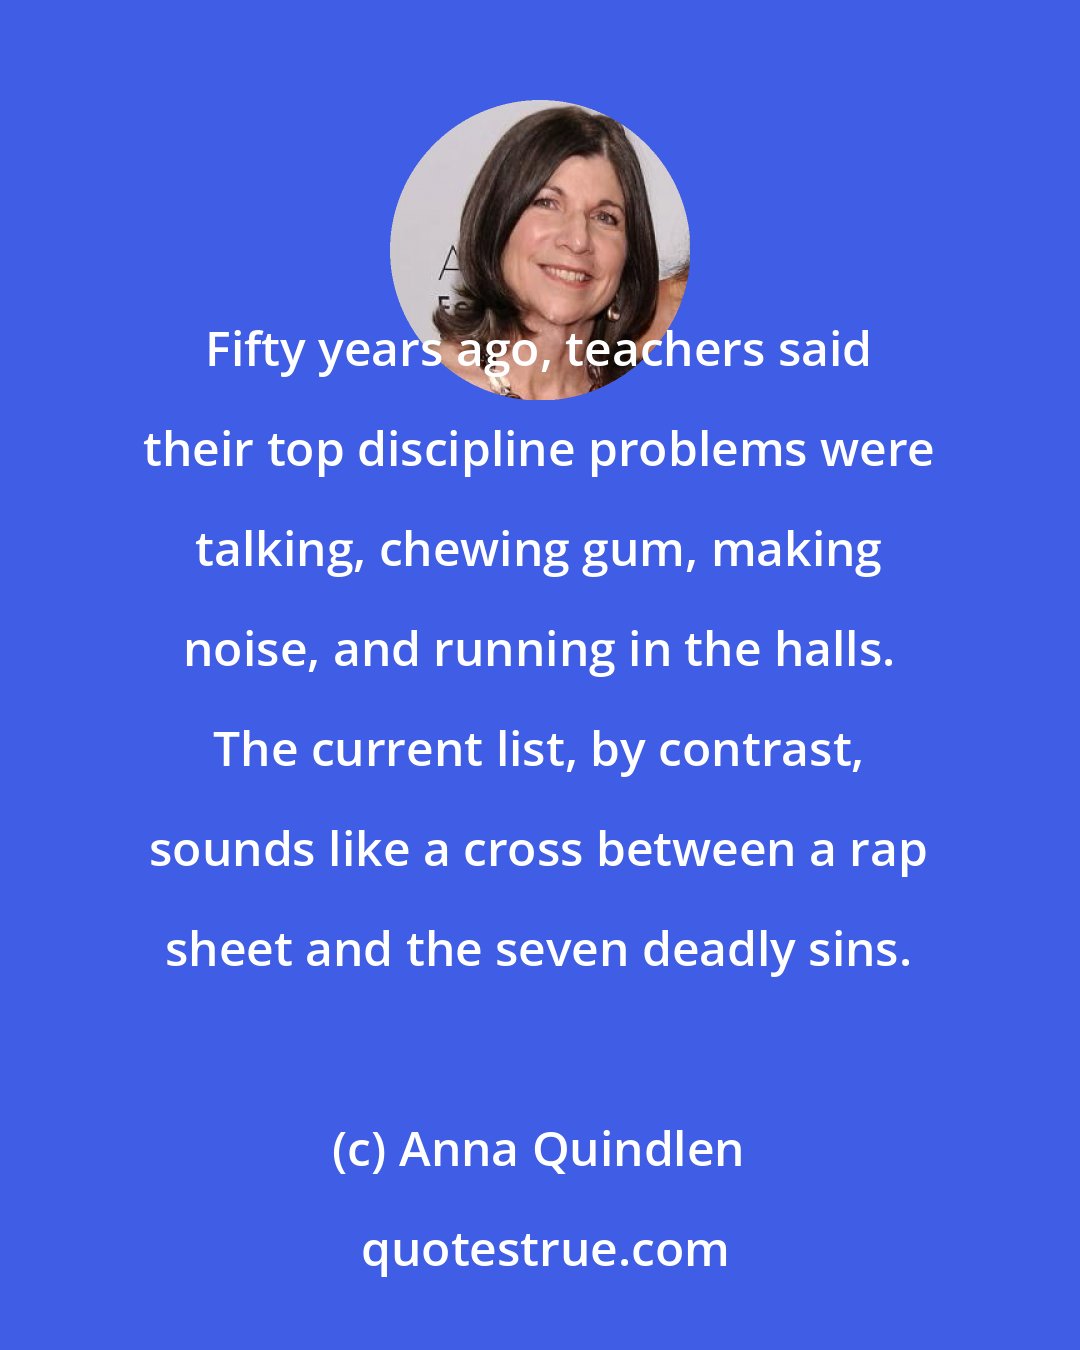 Anna Quindlen: Fifty years ago, teachers said their top discipline problems were talking, chewing gum, making noise, and running in the halls. The current list, by contrast, sounds like a cross between a rap sheet and the seven deadly sins.